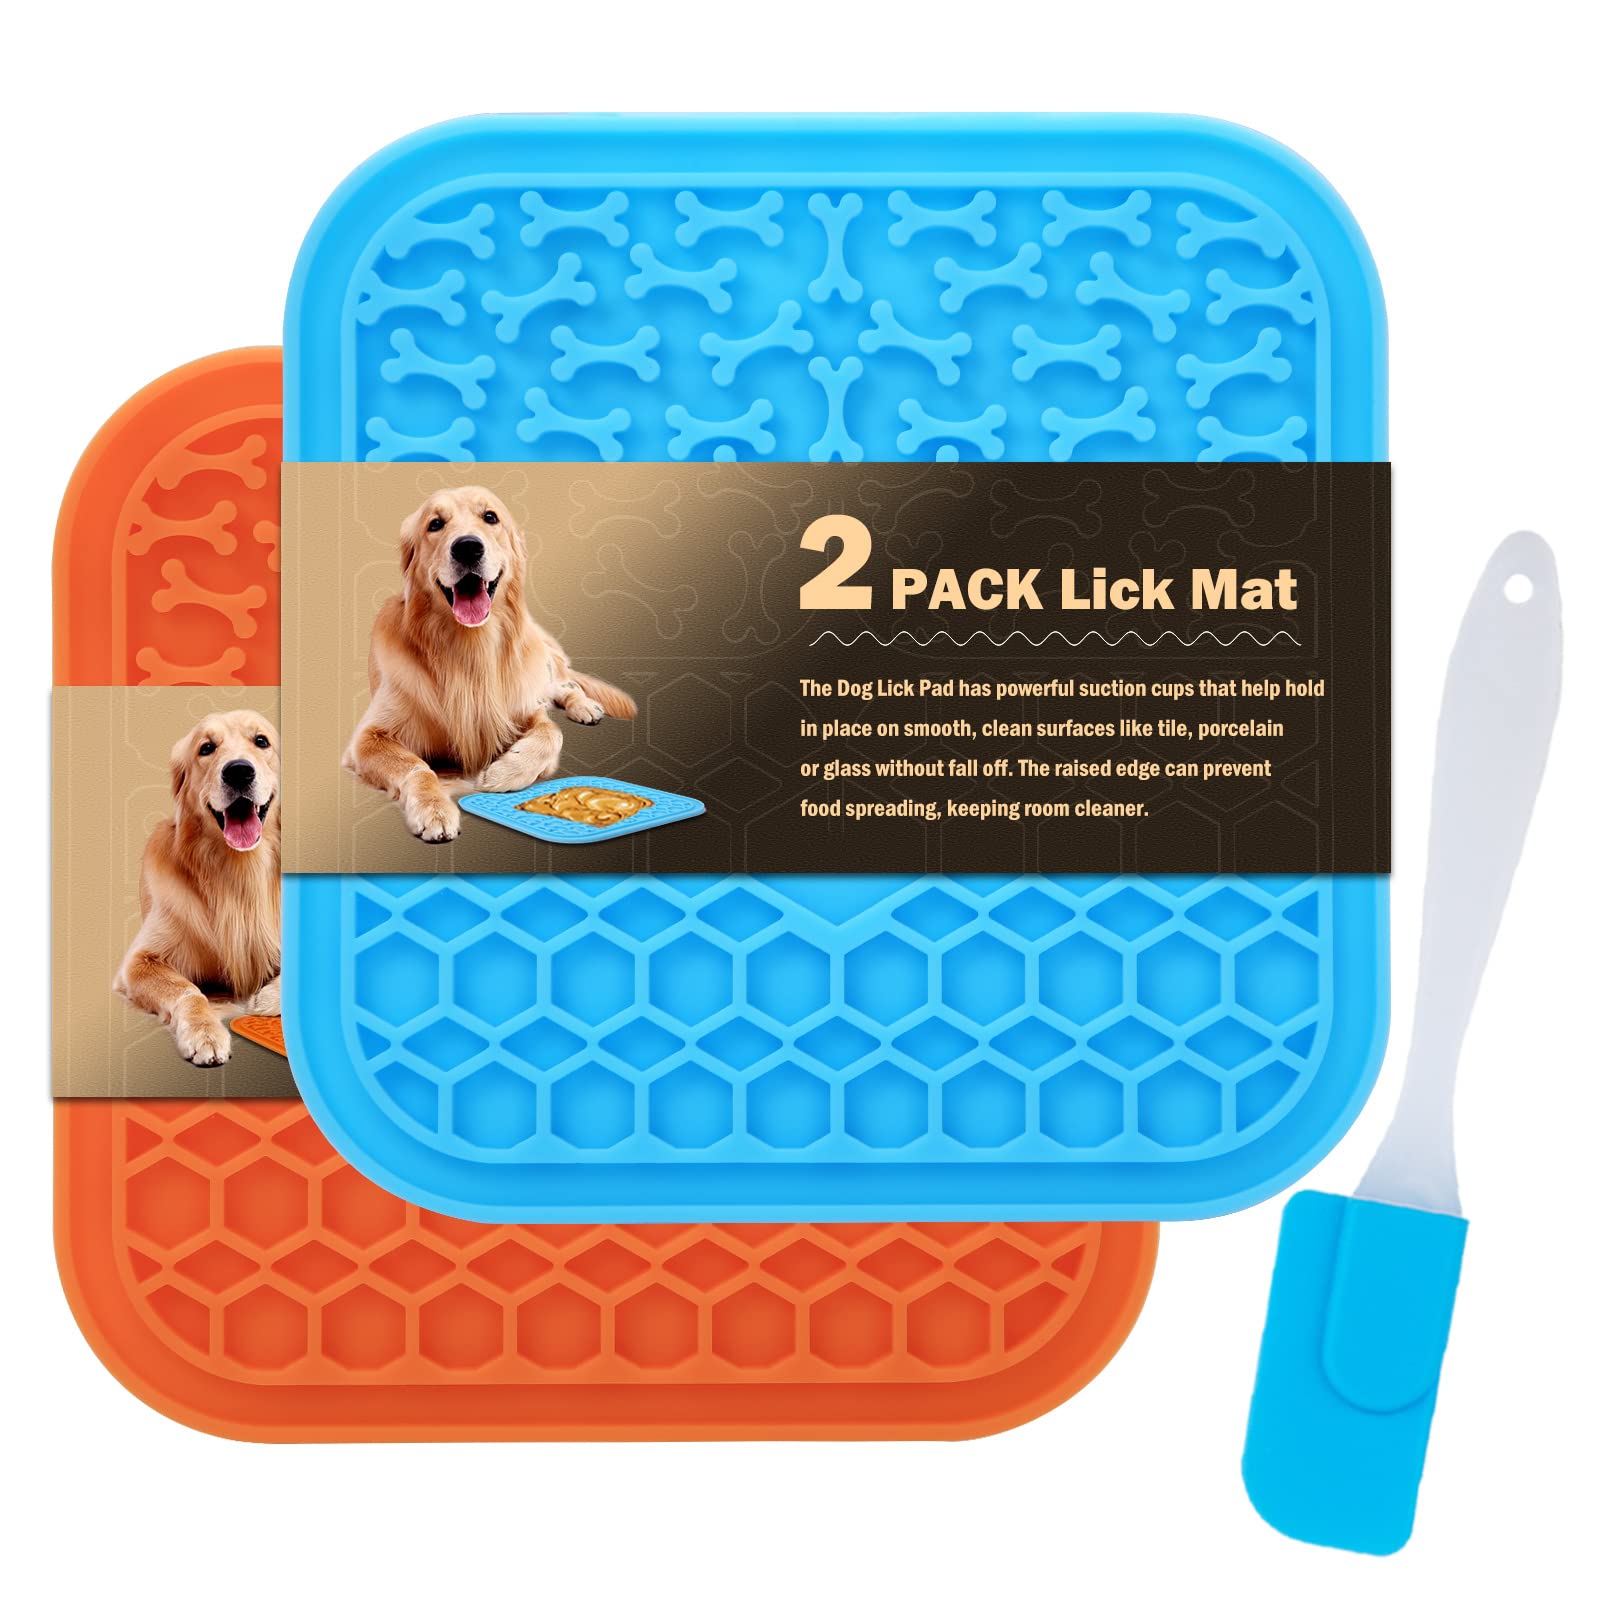 Petbank Lick Mat for Dogs Peanut Butter Licking Mats Slow Feeding Dog Bowl,  Tattoo and Anxiety Reducer for Pet Food, Yogurt, Dog Bath, Dog Grooming